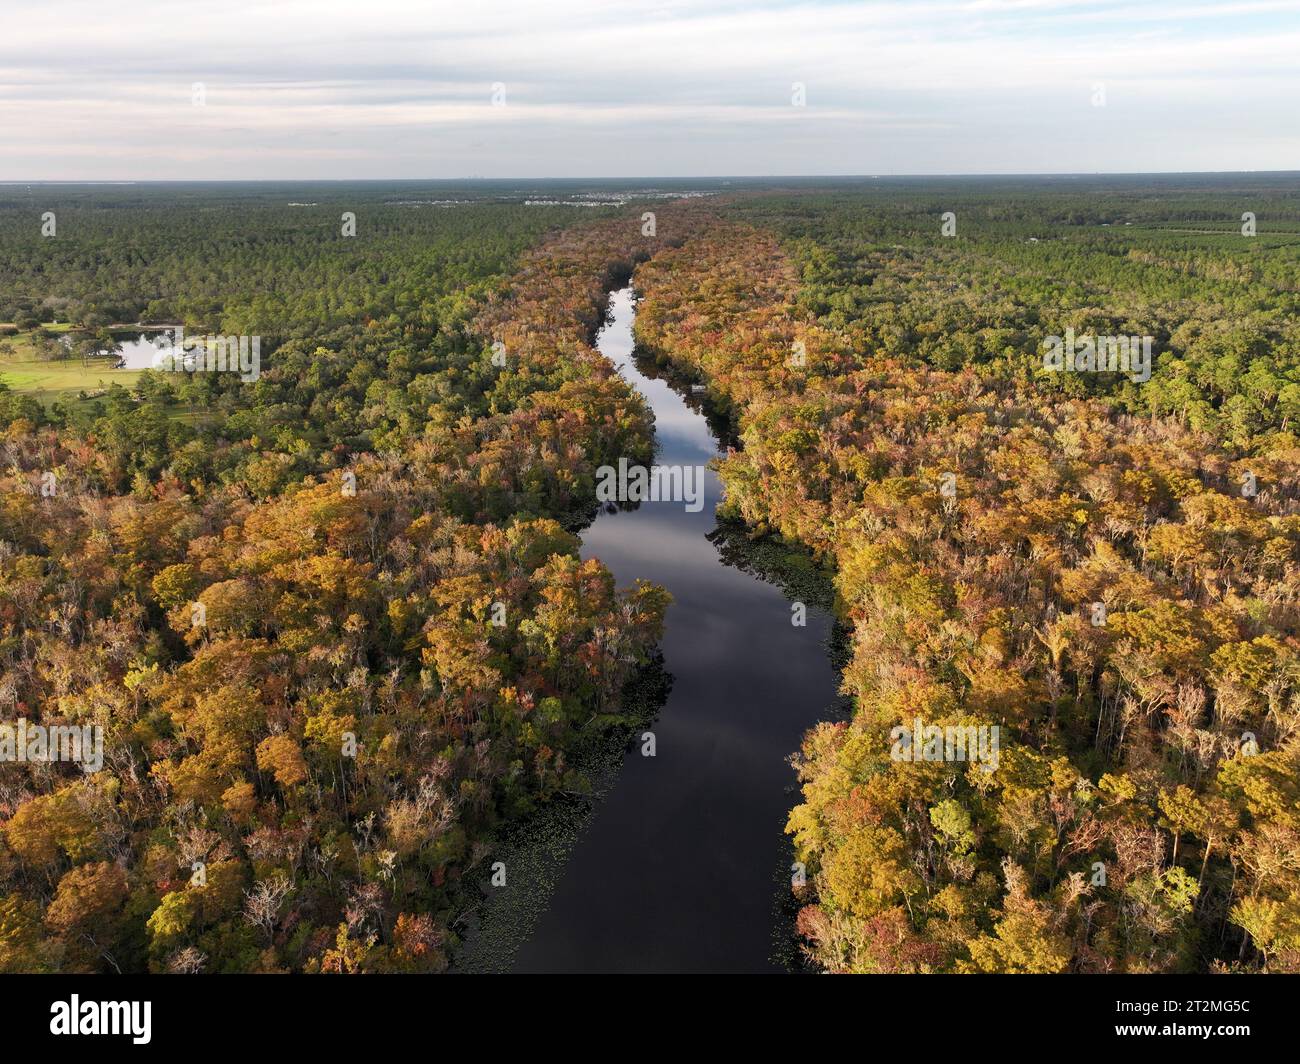 An aerial view of Trout Creek in St. Johns County, Florida Stock Photo